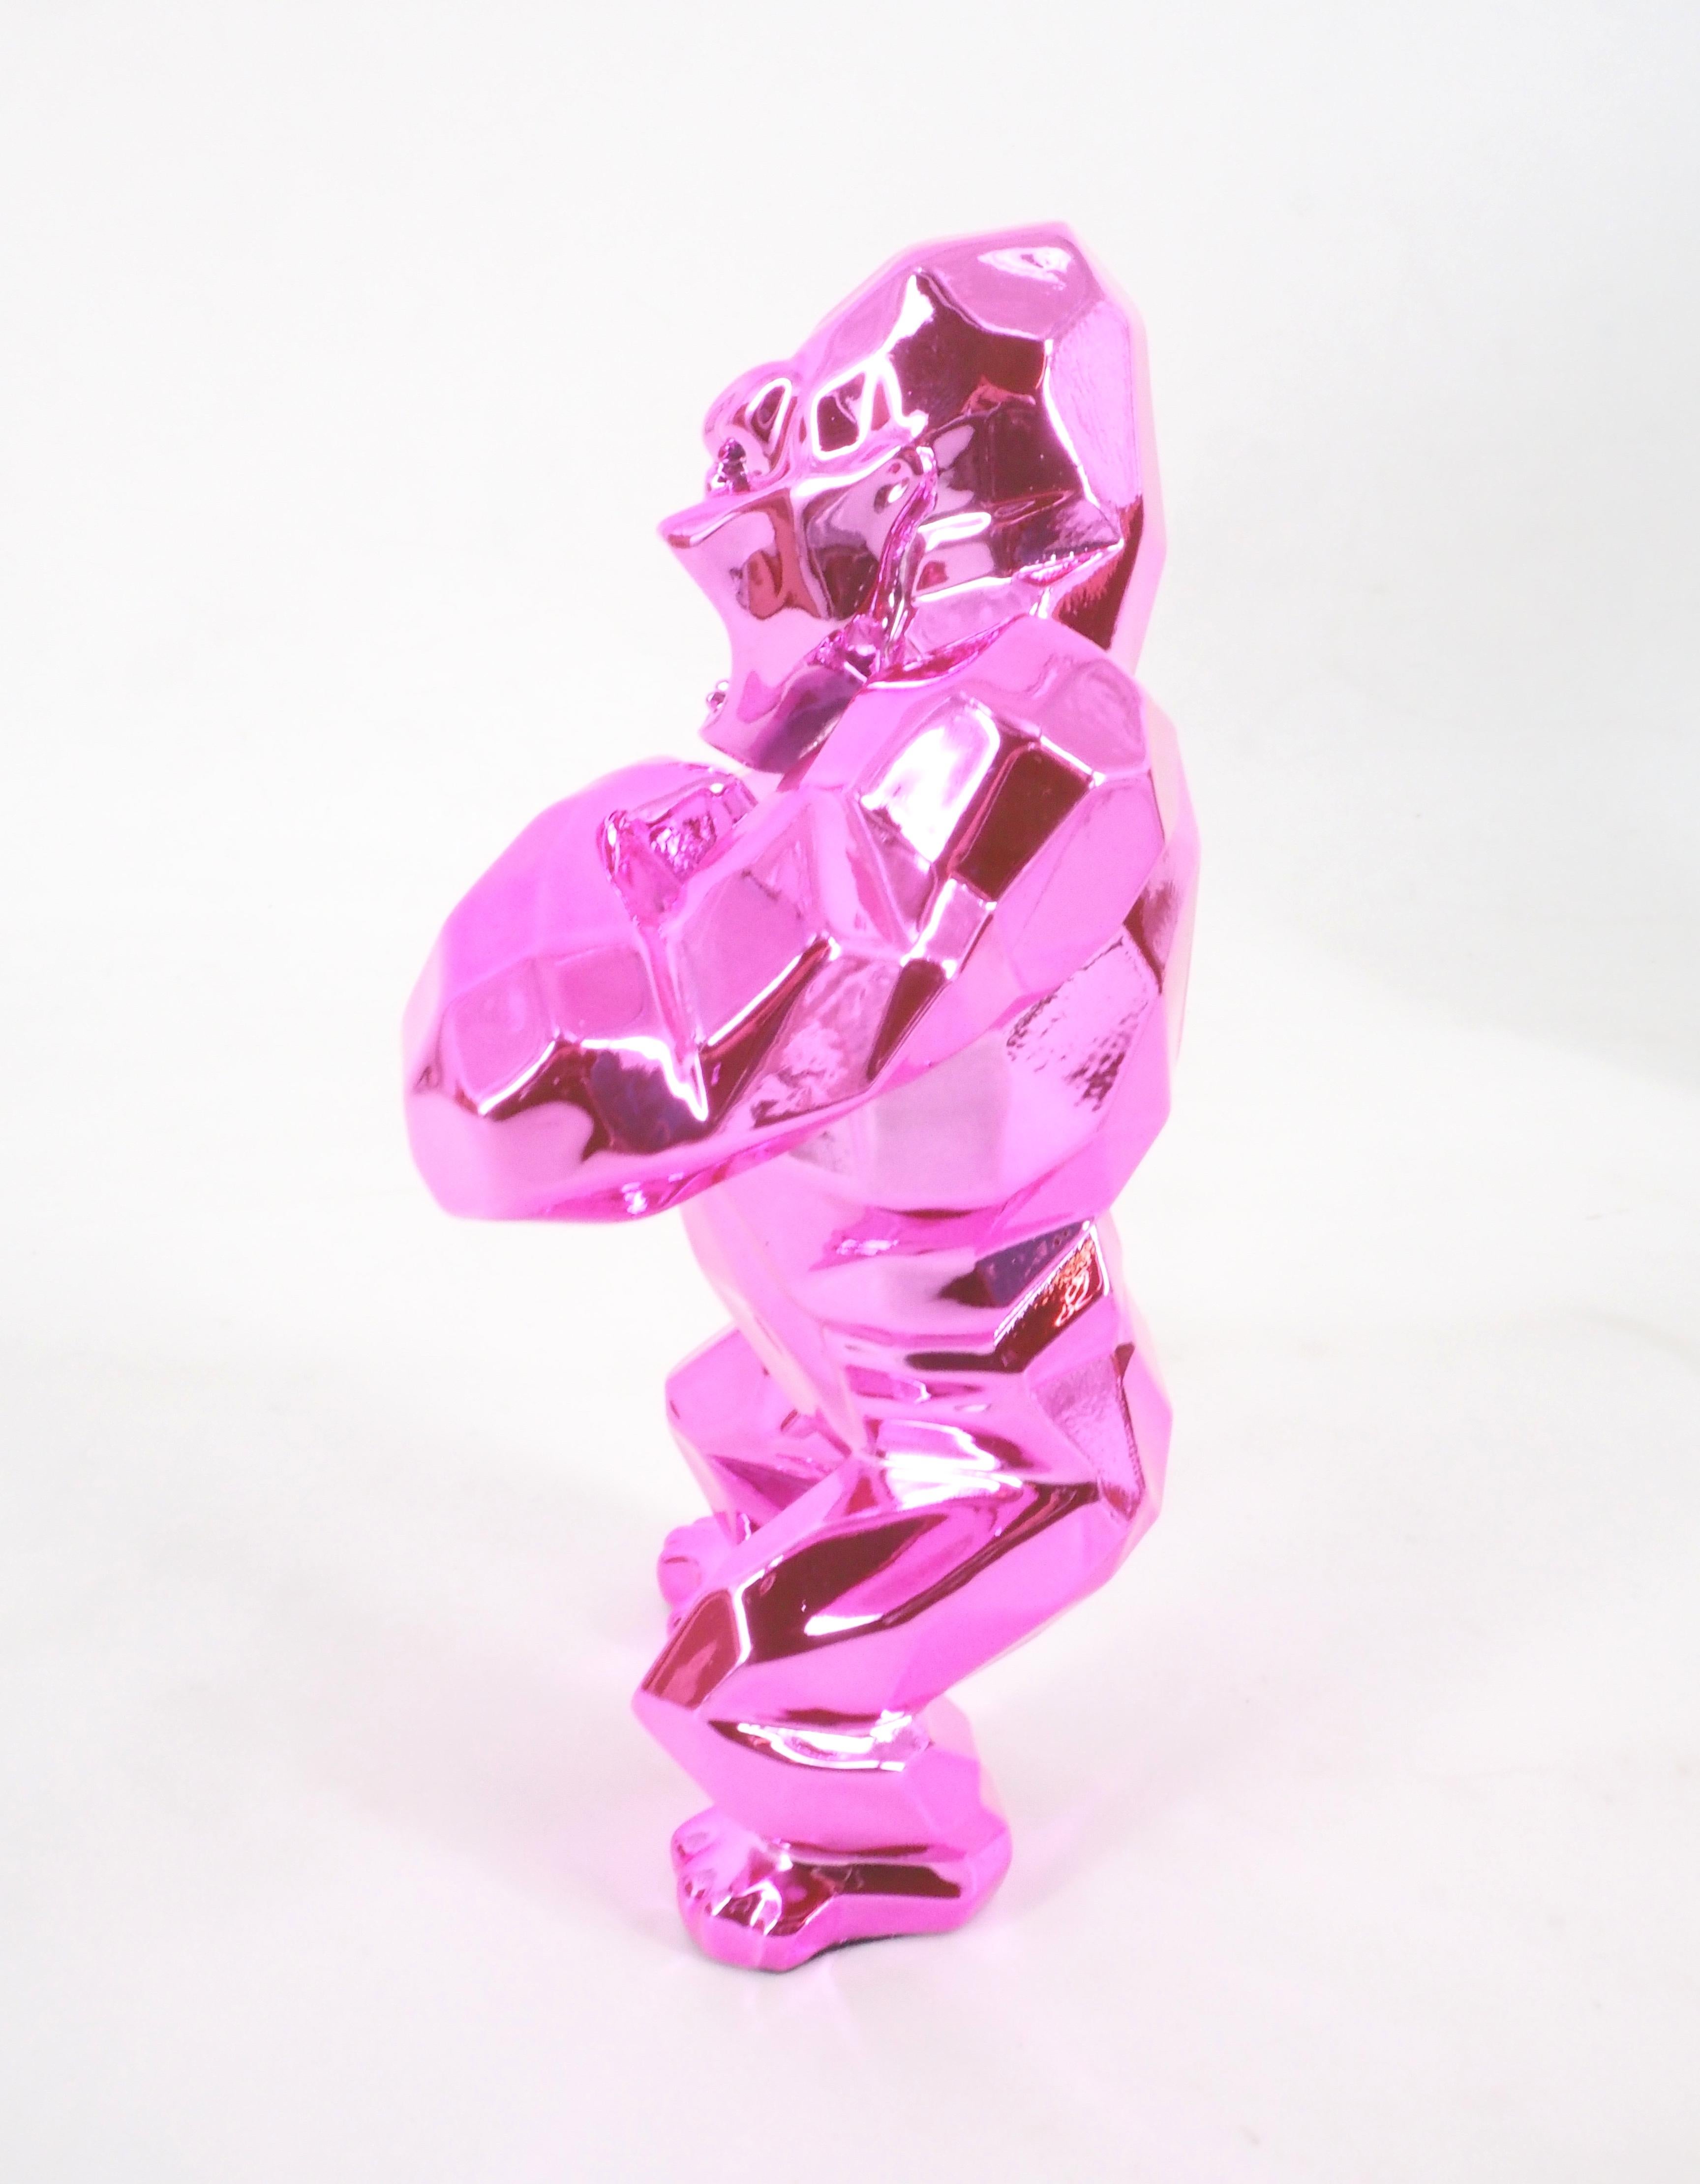 Richard ORLINSKI
Kong Spirit (Pink edition)

Sculpture in resin
Metallic Pink
About 13 x 10 x 5 cm (c. 5,1 x 3,9 x 1,9 in)
Presented in original box with certificate

Excellent condition